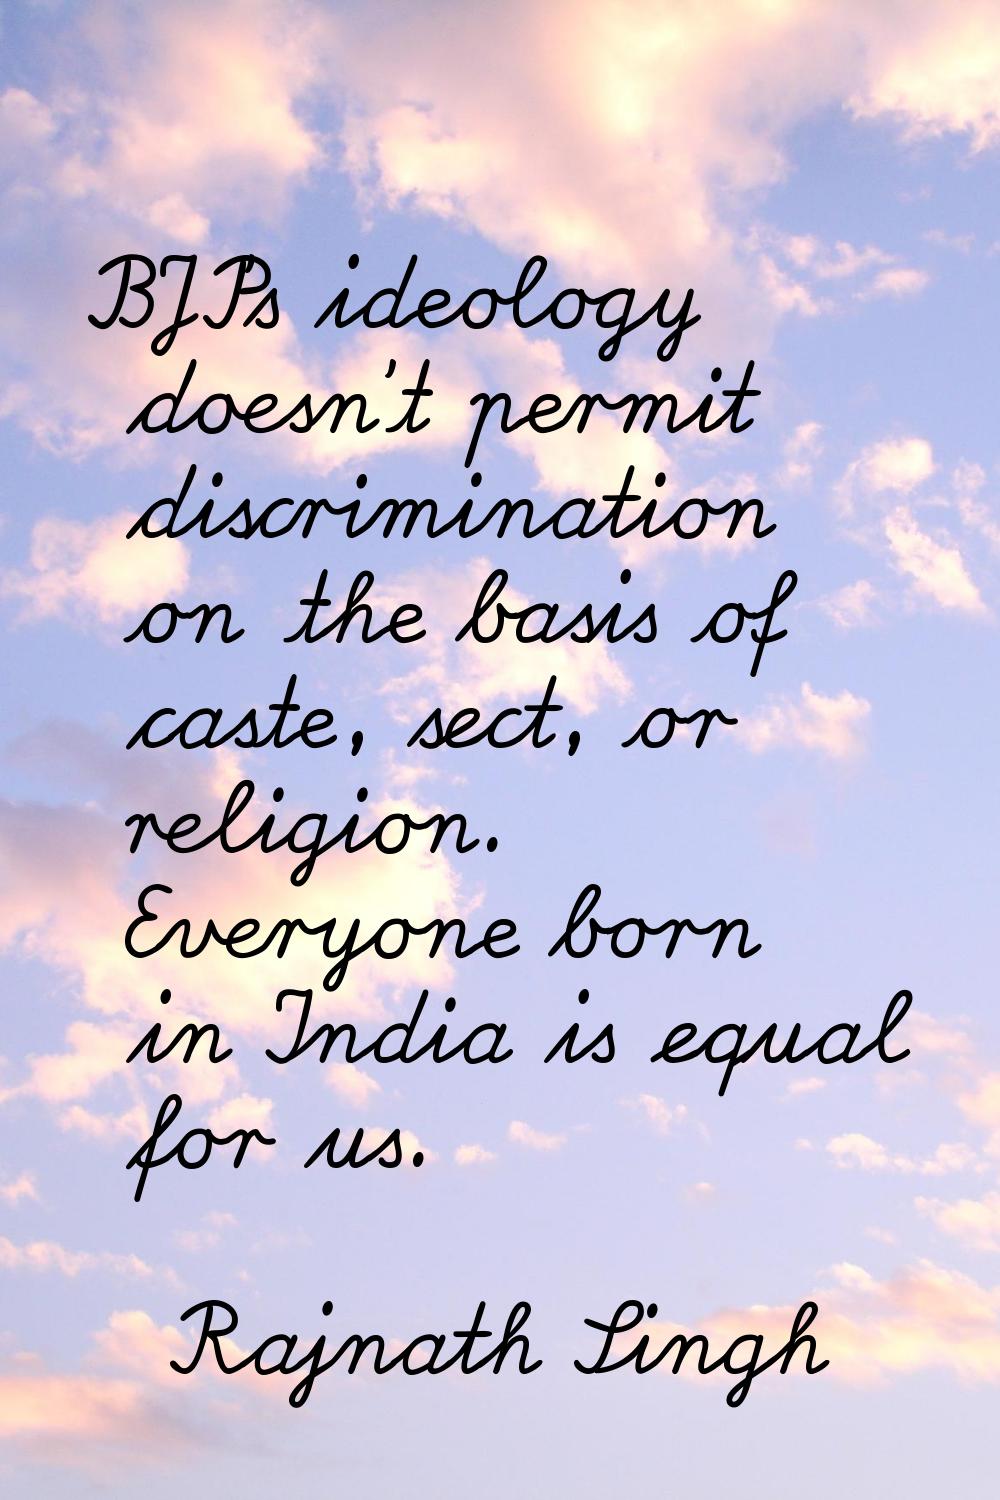 BJP's ideology doesn't permit discrimination on the basis of caste, sect, or religion. Everyone bor